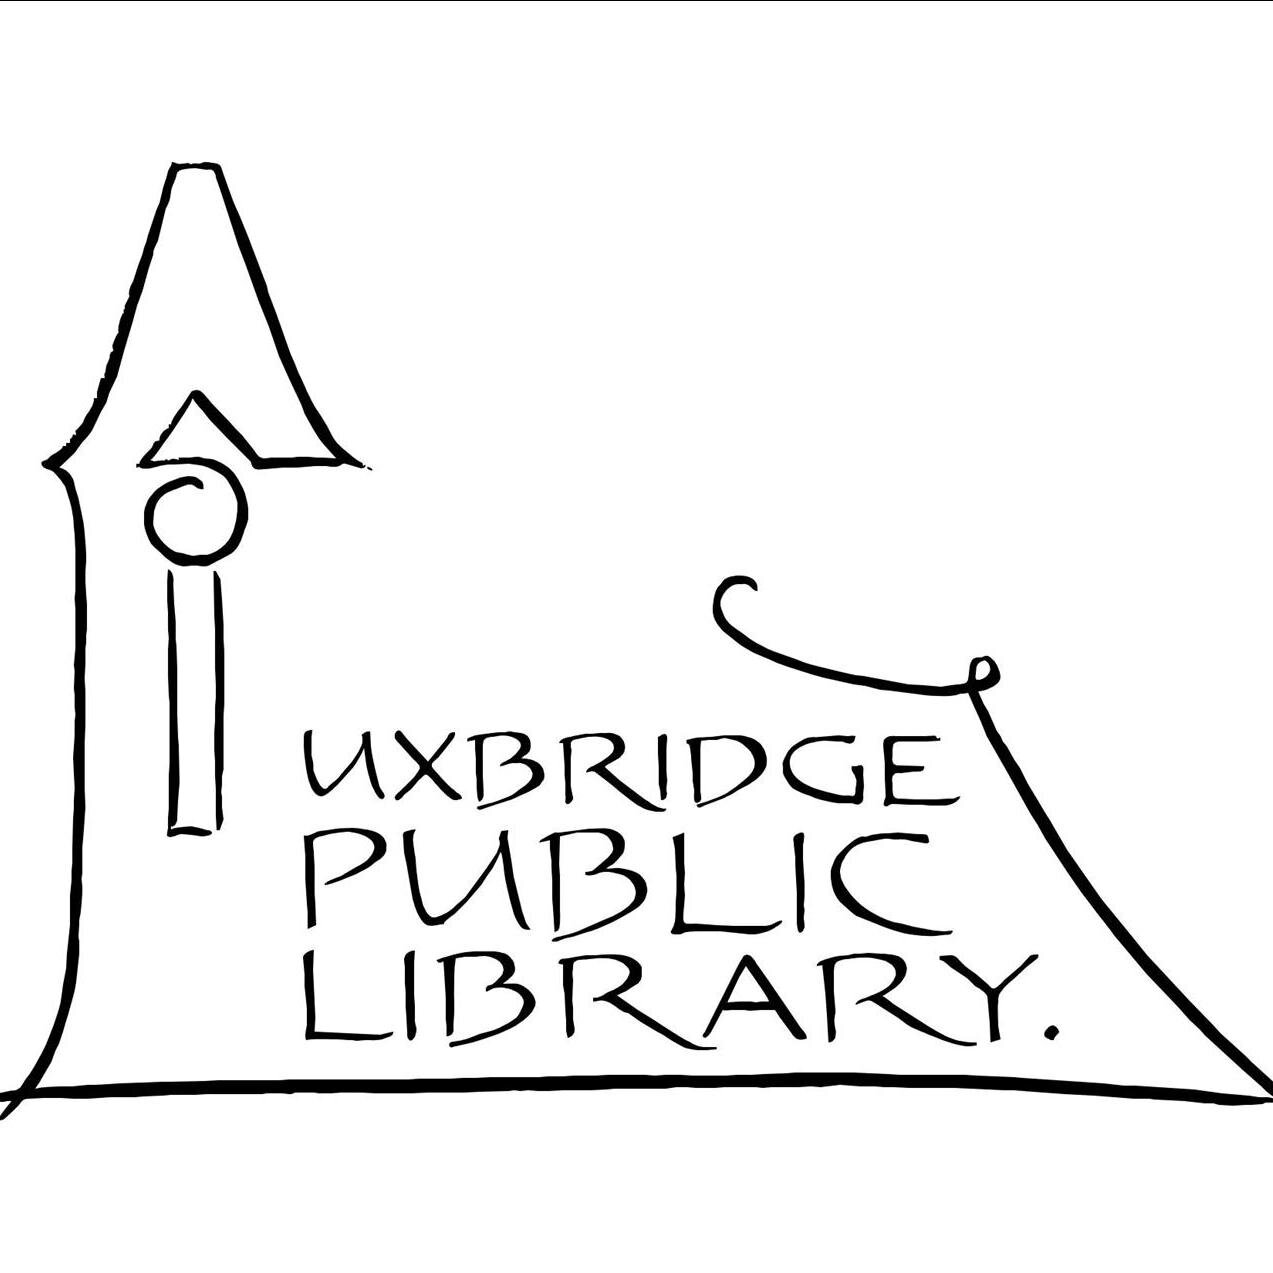 Uxbridge Public Library is a community hub that brings together people, information & ideas.